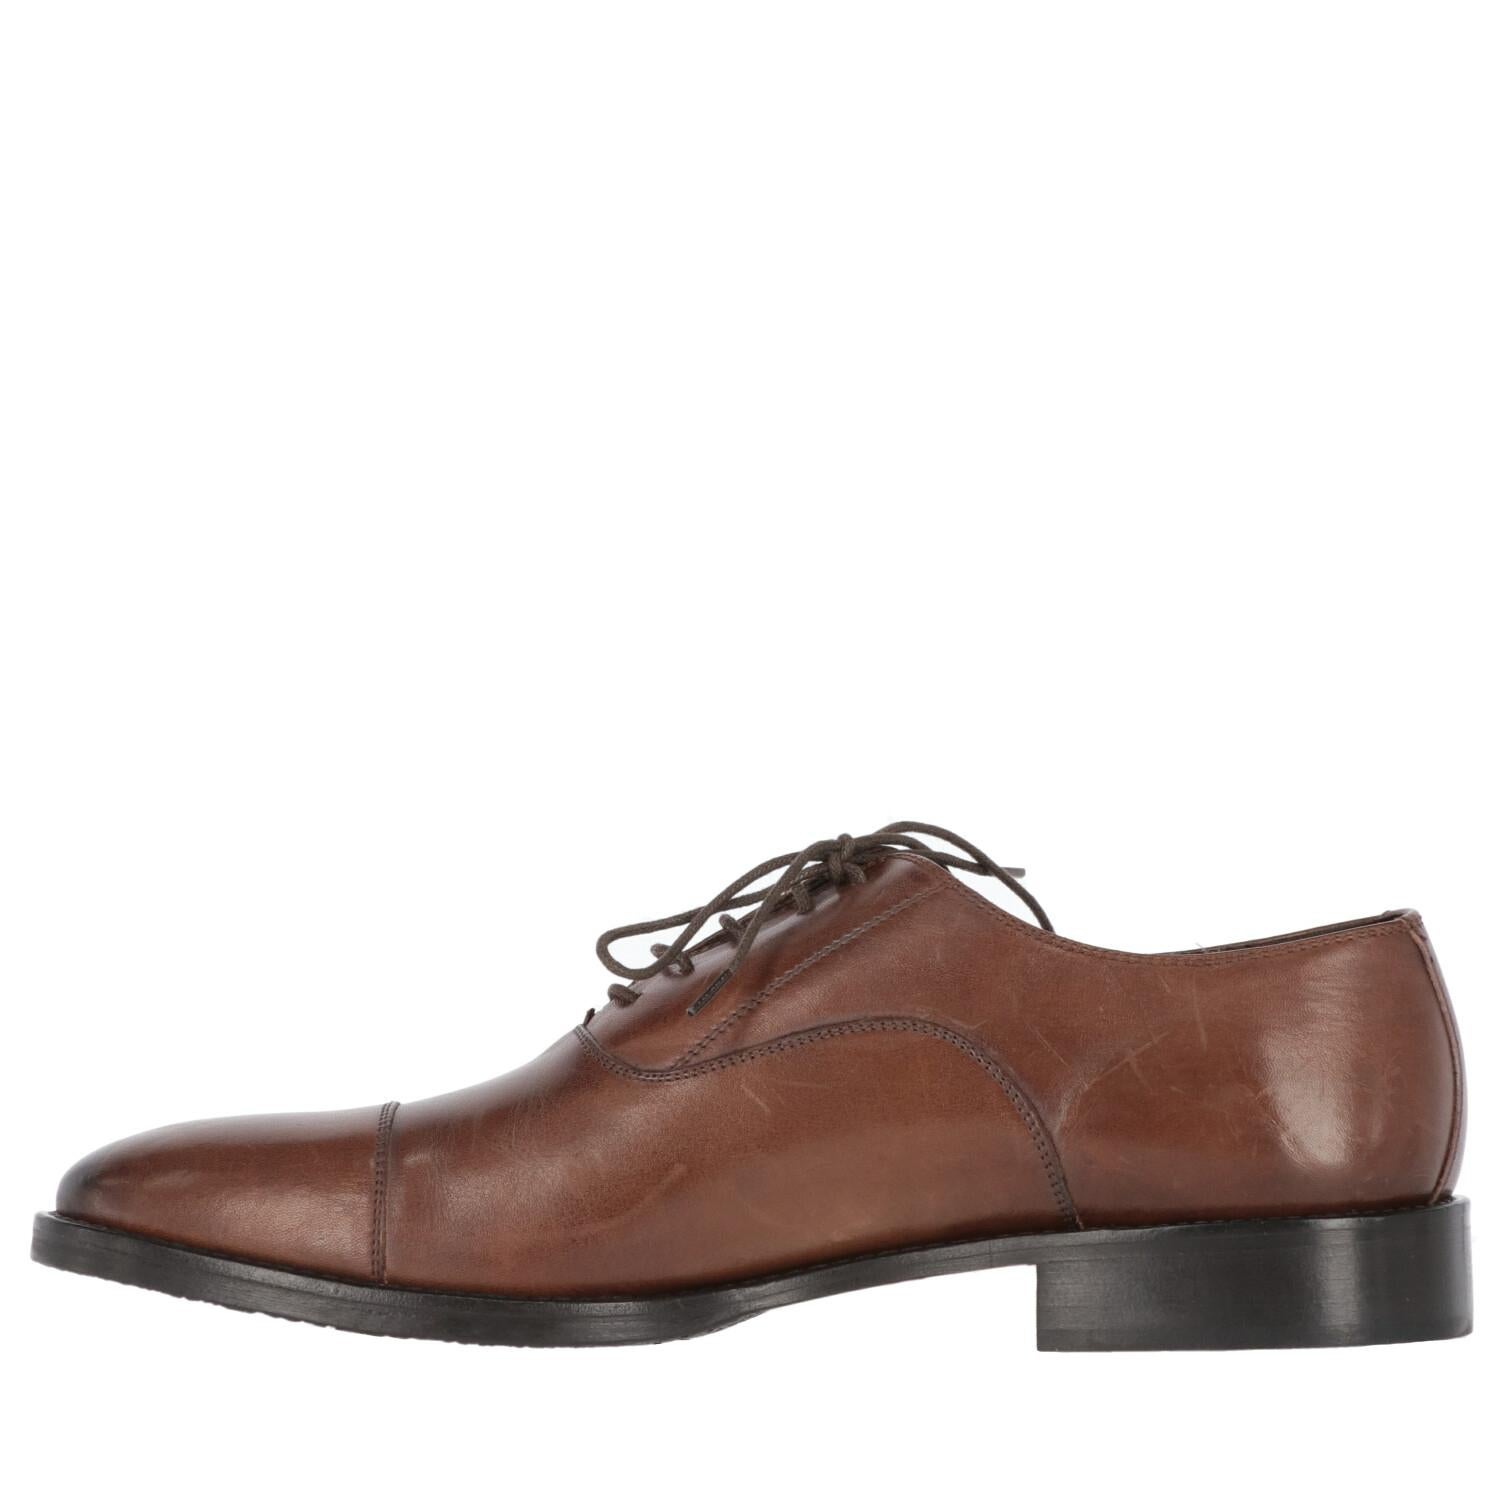 A.N.G.E.L.O. Vintage - ITALY
Pollini brown leather classic lace-up shoes. Oxford model with tone on tone shoe laces, high shine finish cap toe stitching and dark round toe.

The shoes are new but show very light scratches on the leather, as shown in